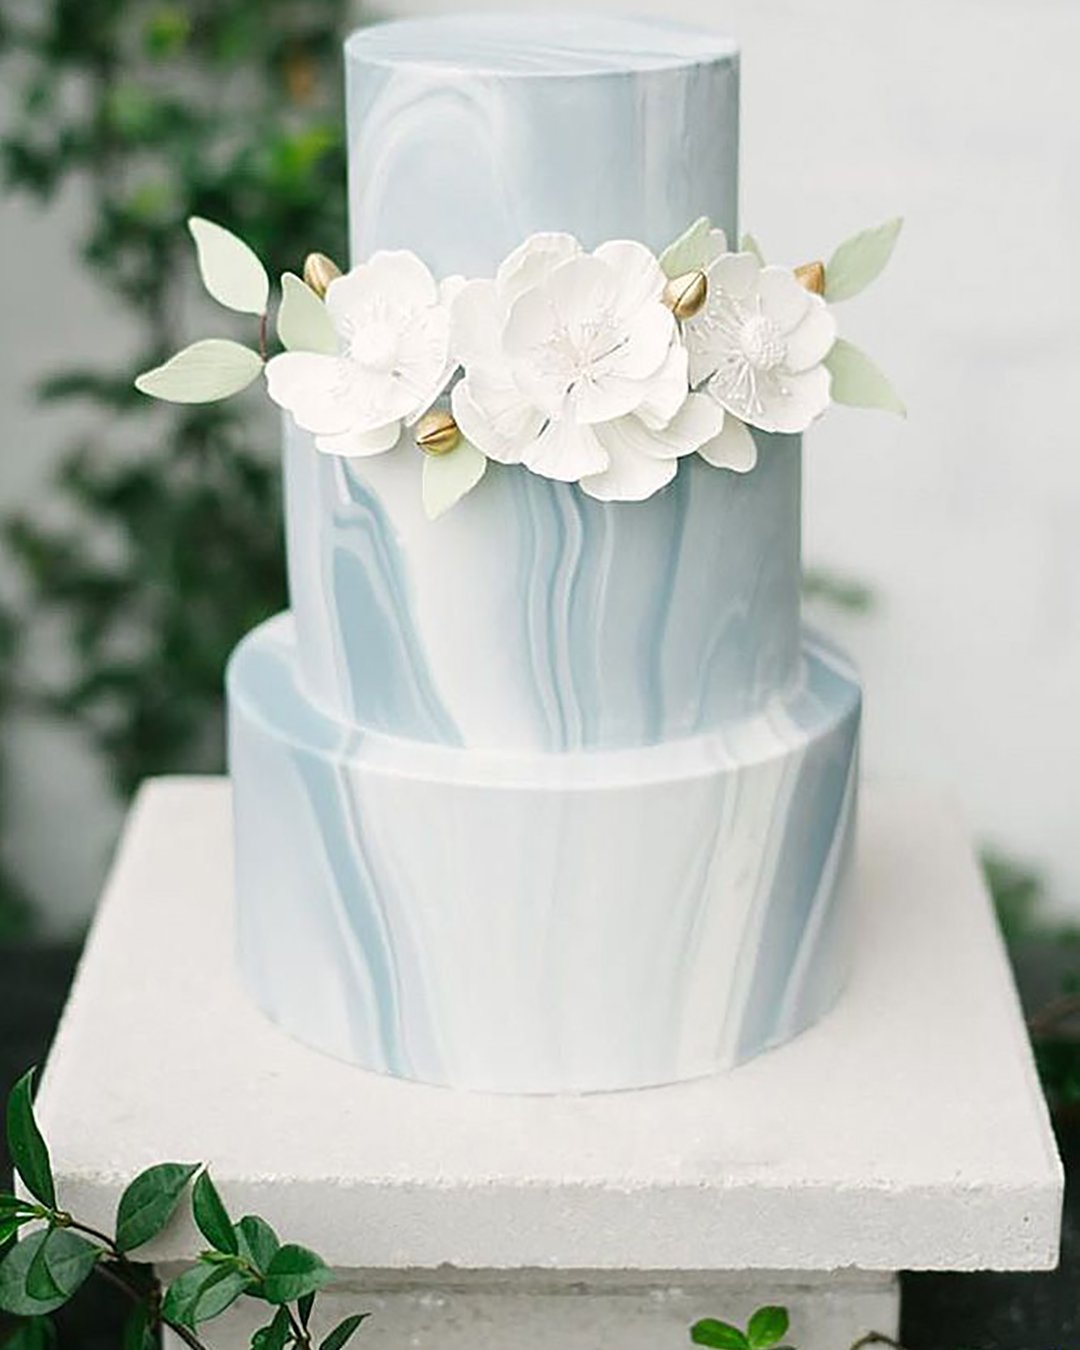 marble wedding cakes three tier with white flowers golden buds and leaves marry me tampa bay via instagram